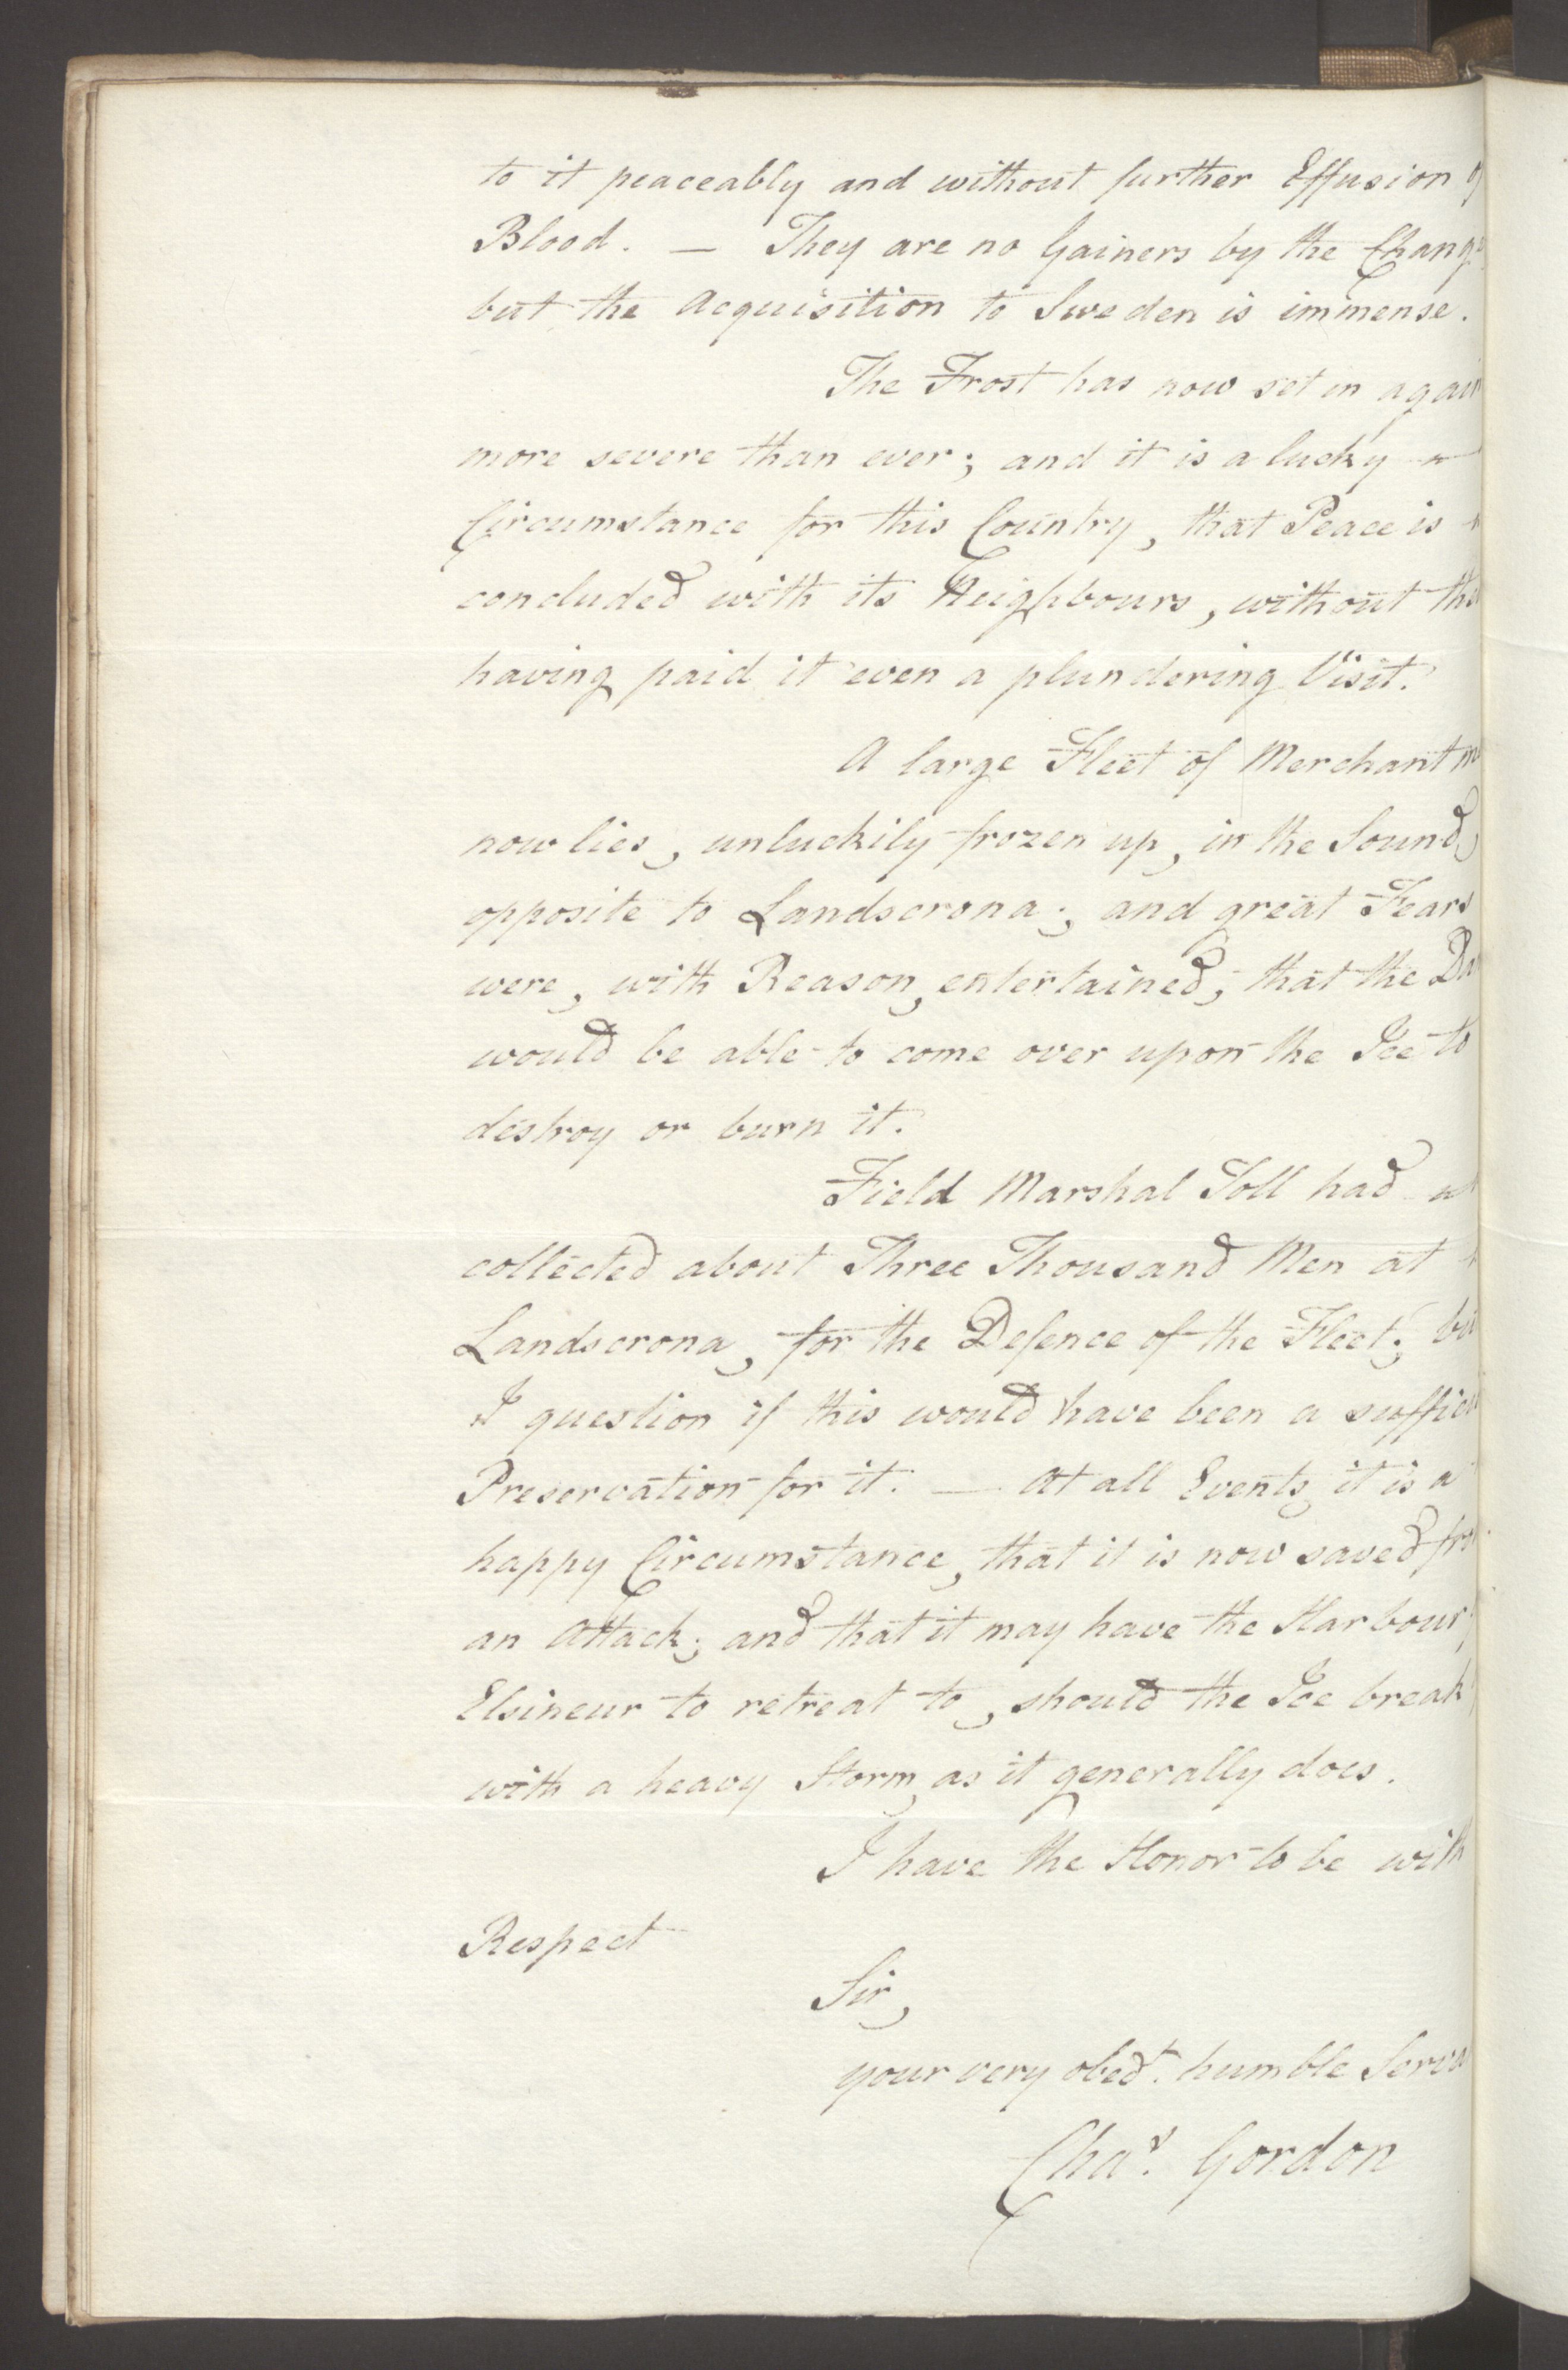 Foreign Office*, UKA/-/FO 38/16: Sir C. Gordon. Reports from Malmö, Jonkoping, and Helsingborg, 1814, p. 12